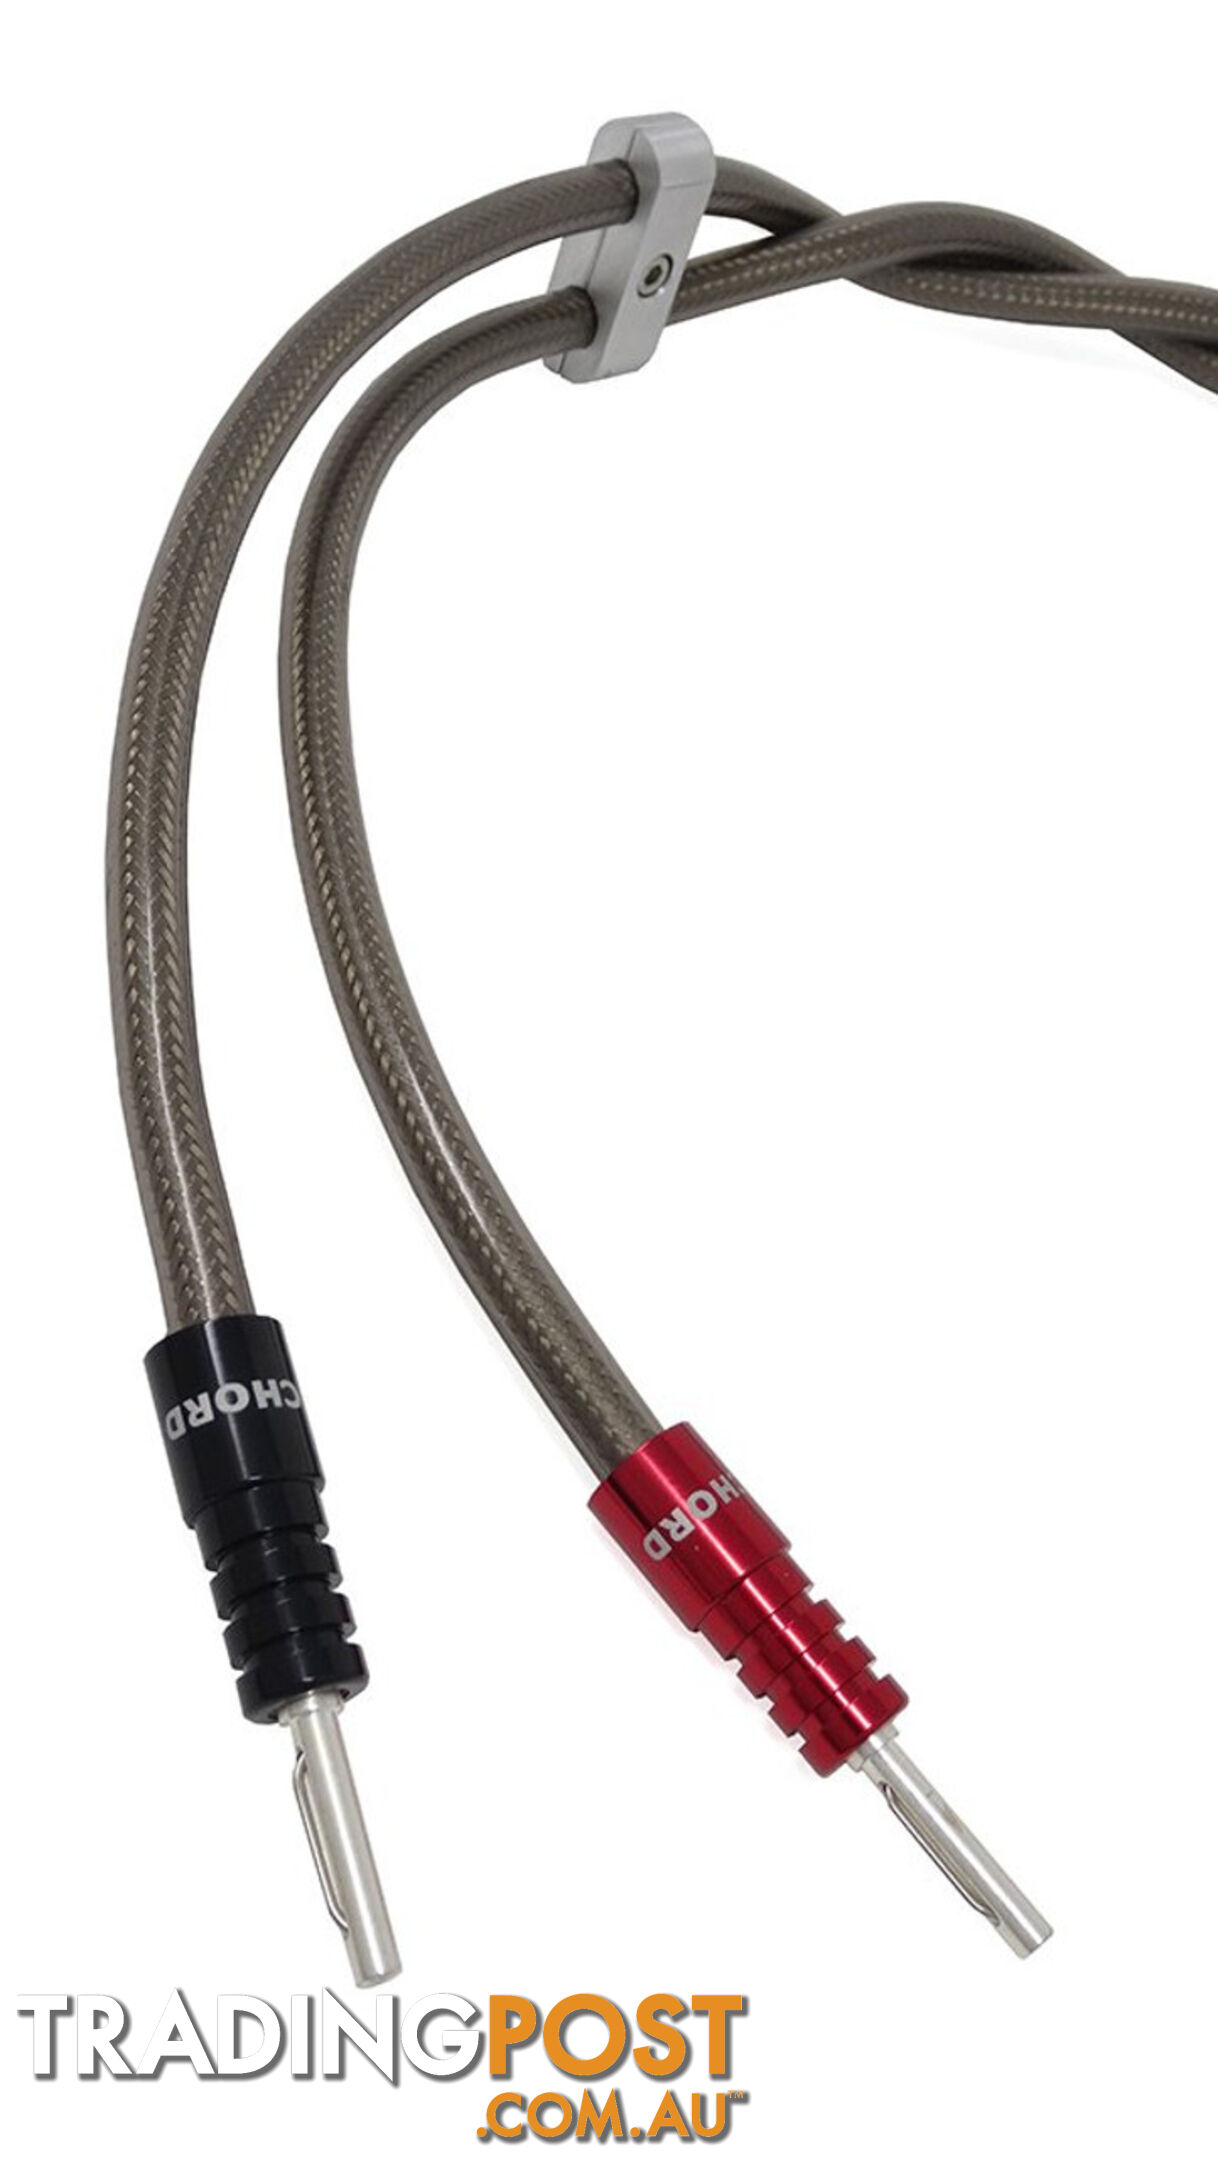 Chord Epic XL High-End Speaker Cable 3m (Pair)